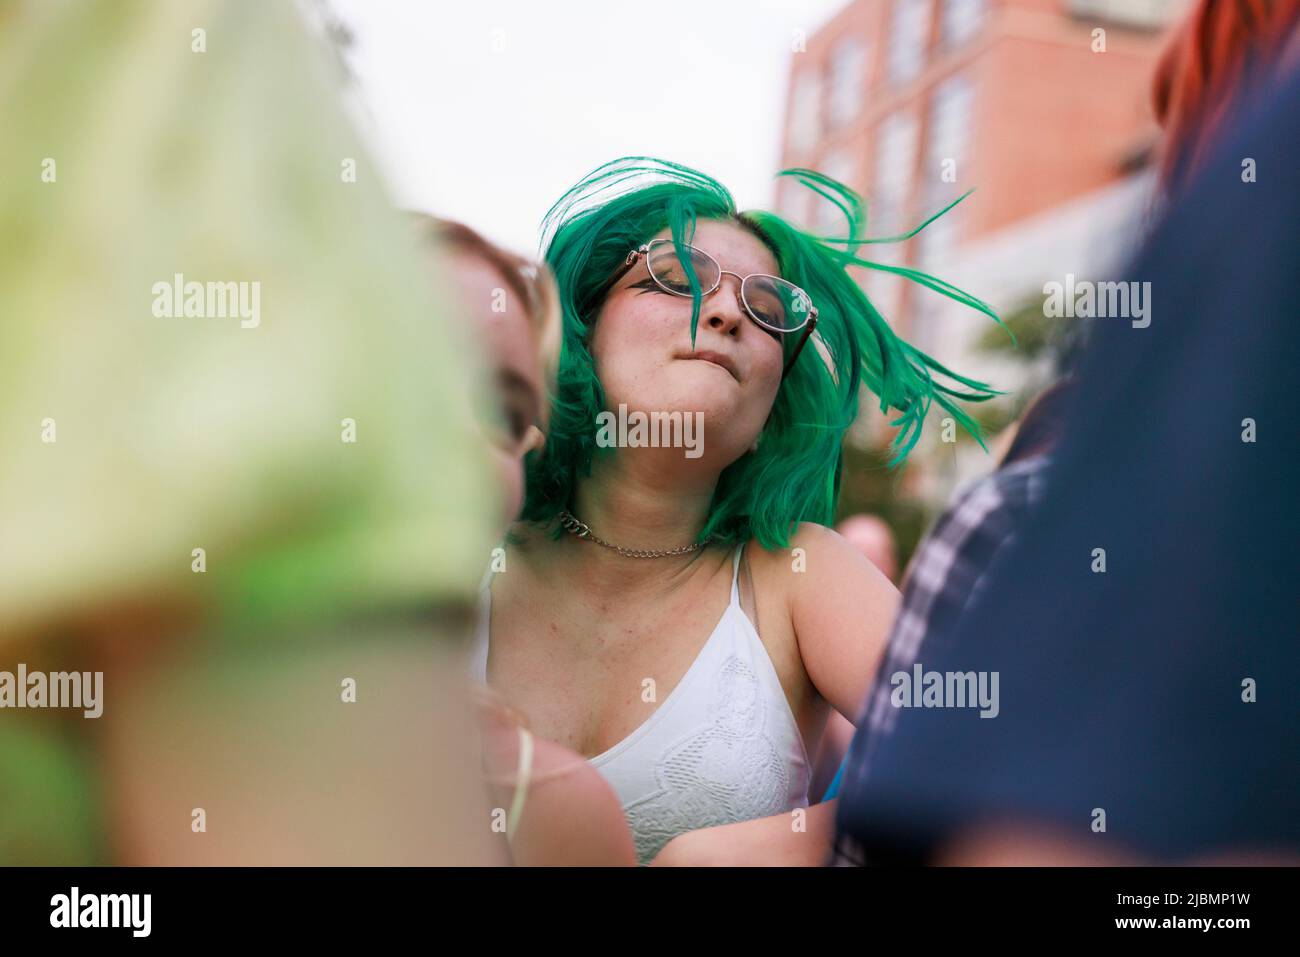 BLOOMINGTON, INDIANA - JUNE 4: An audience member dances as Car Seat Headrest performs during the Granfalloon festival on June 4, 2022, in Bloomington, Indiana. ÒGranfalloon is an annual festival of arts, music, and scholarship inspired by Hoosier author Kurt Vonnegut,Ó according to the eventÕs webpage. The festival takes place in Bloomington, Indiana. Stock Photo